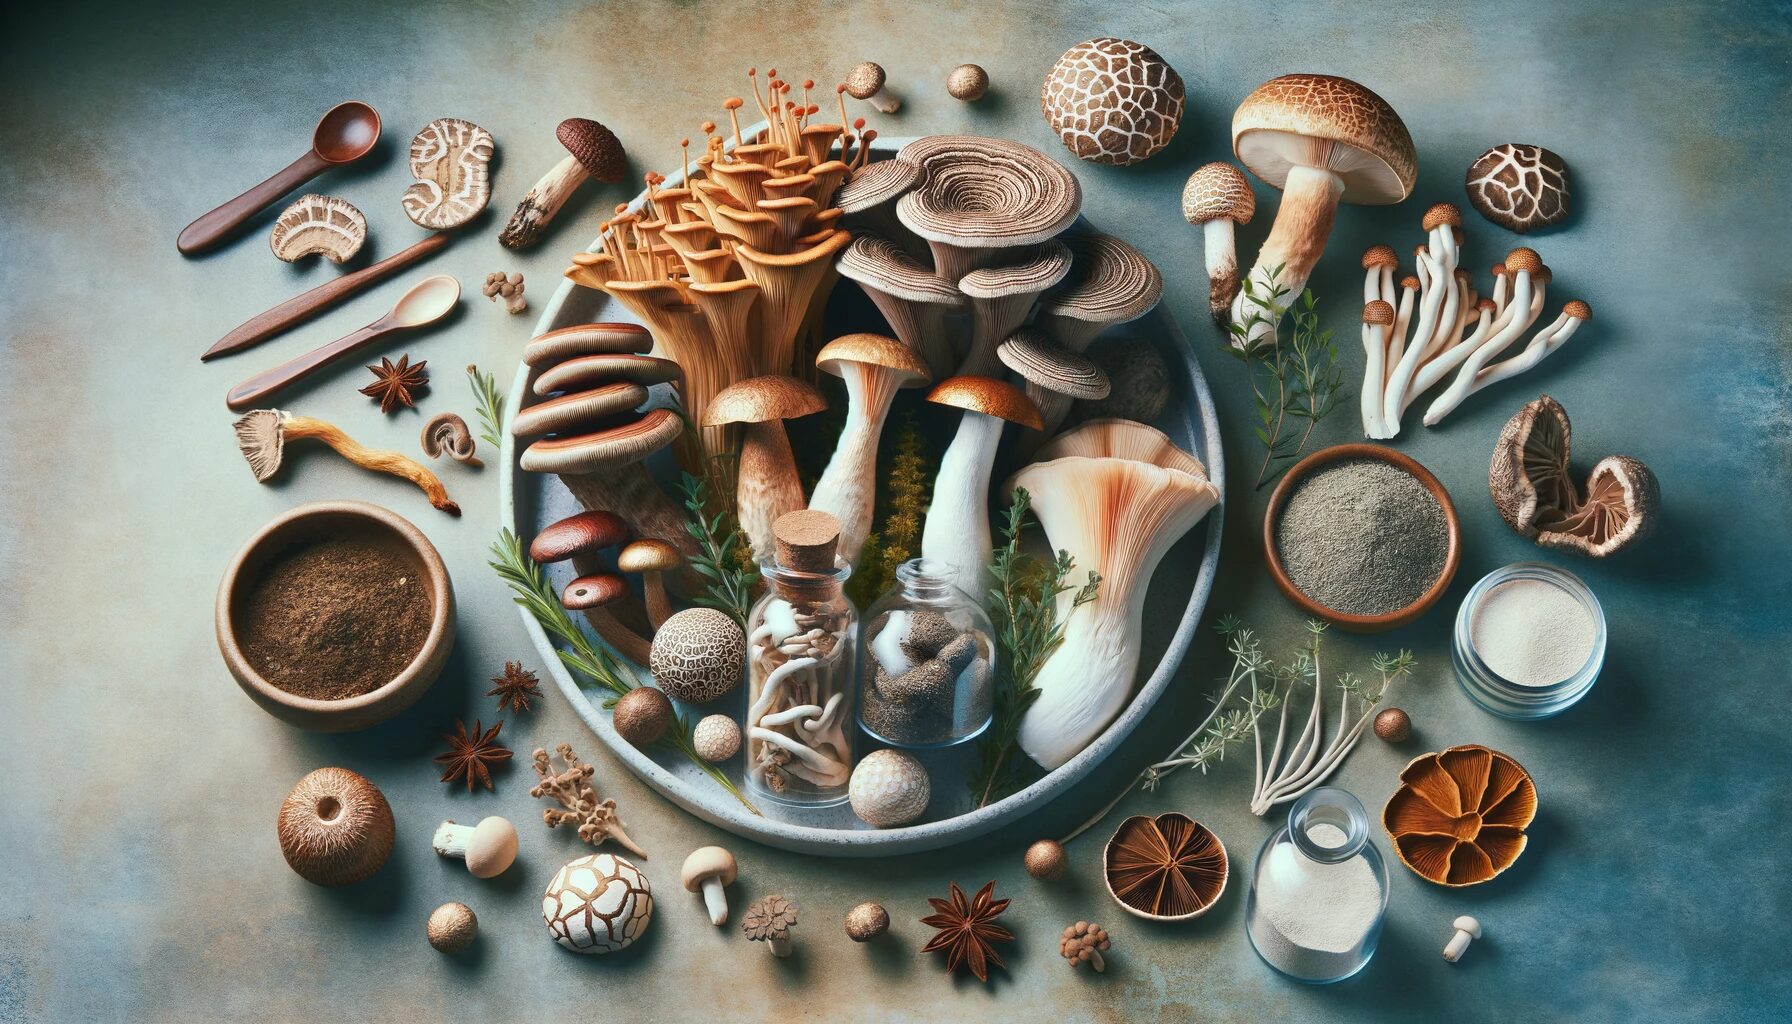 What Are Adaptogenic Mushrooms? Benefits, Risks, and Types